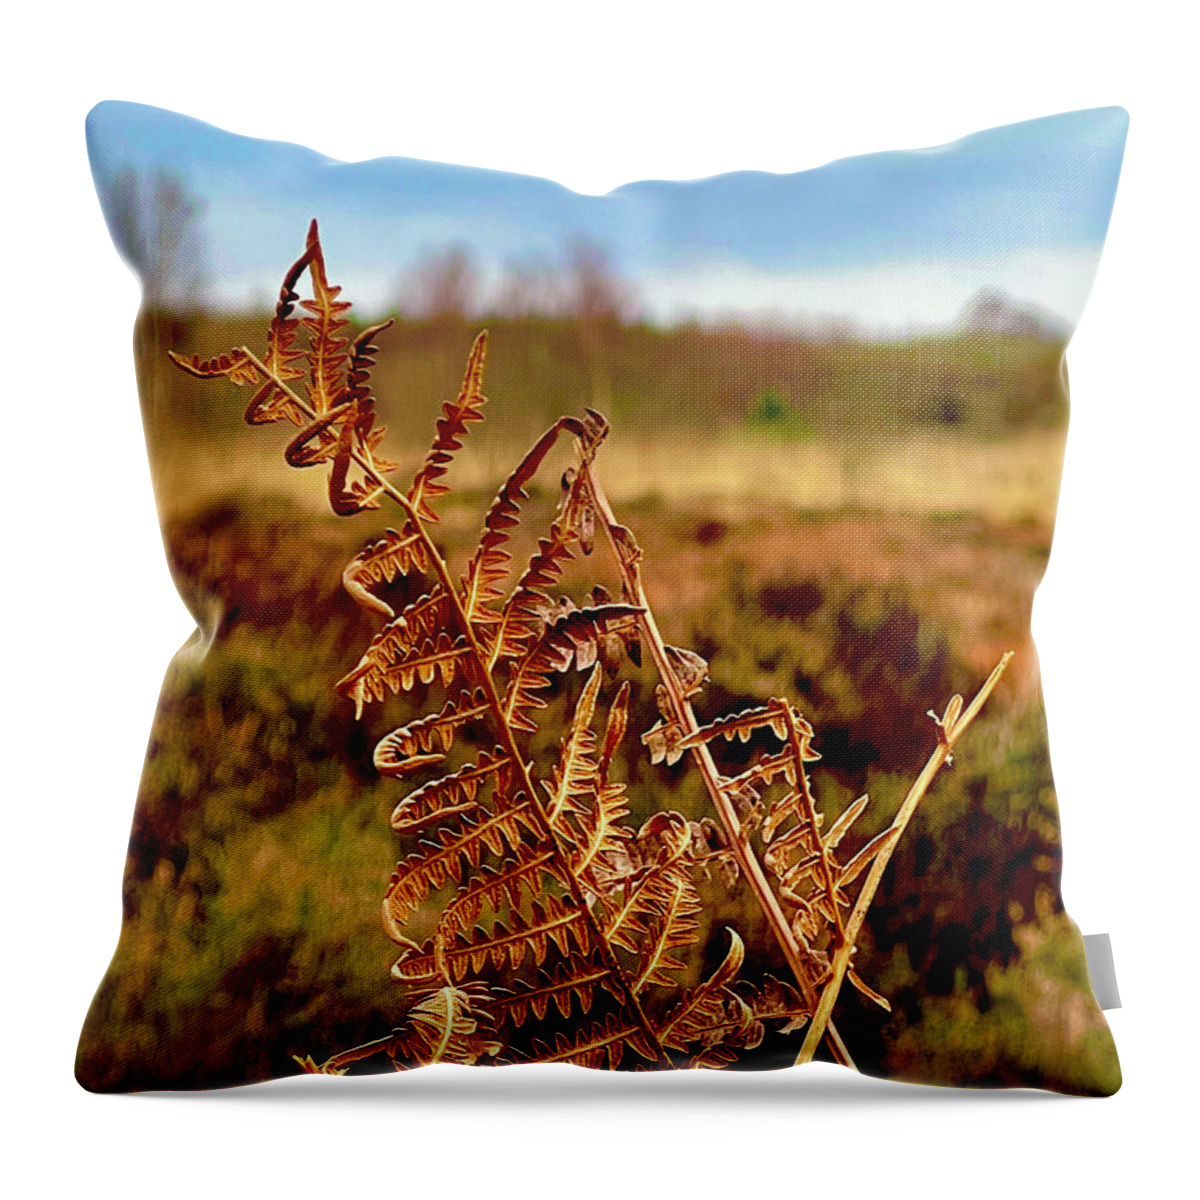 Clooncraff Throw Pillow featuring the photograph Ferns of Yesterday by Six Months Of Walking